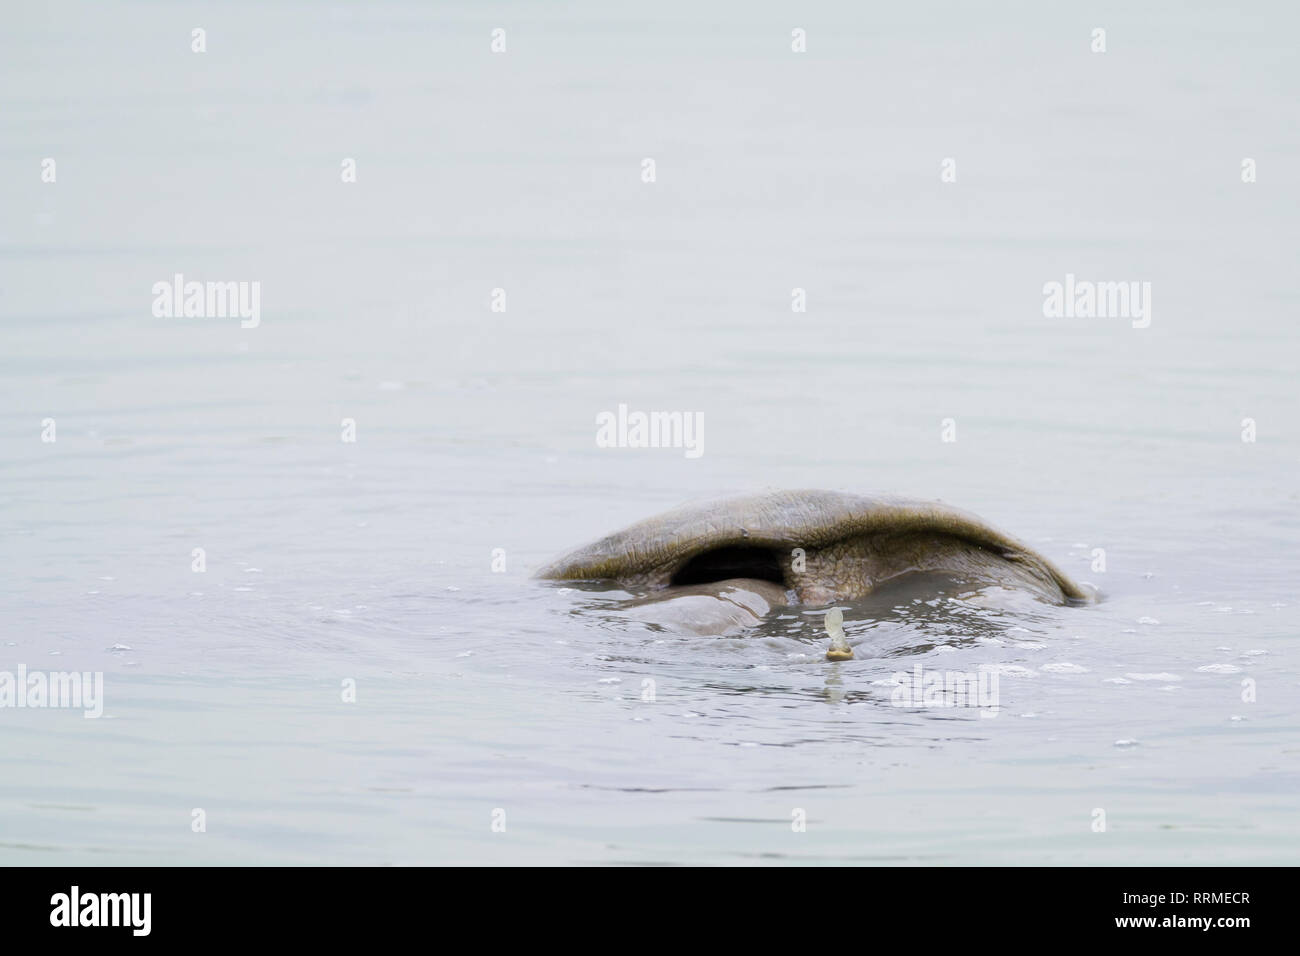 Adult Indian Softshell Turtle (Nilssonia gangetica) in water. Keoladeo National Park. Bharatpur. Rajasthan. India. Stock Photo